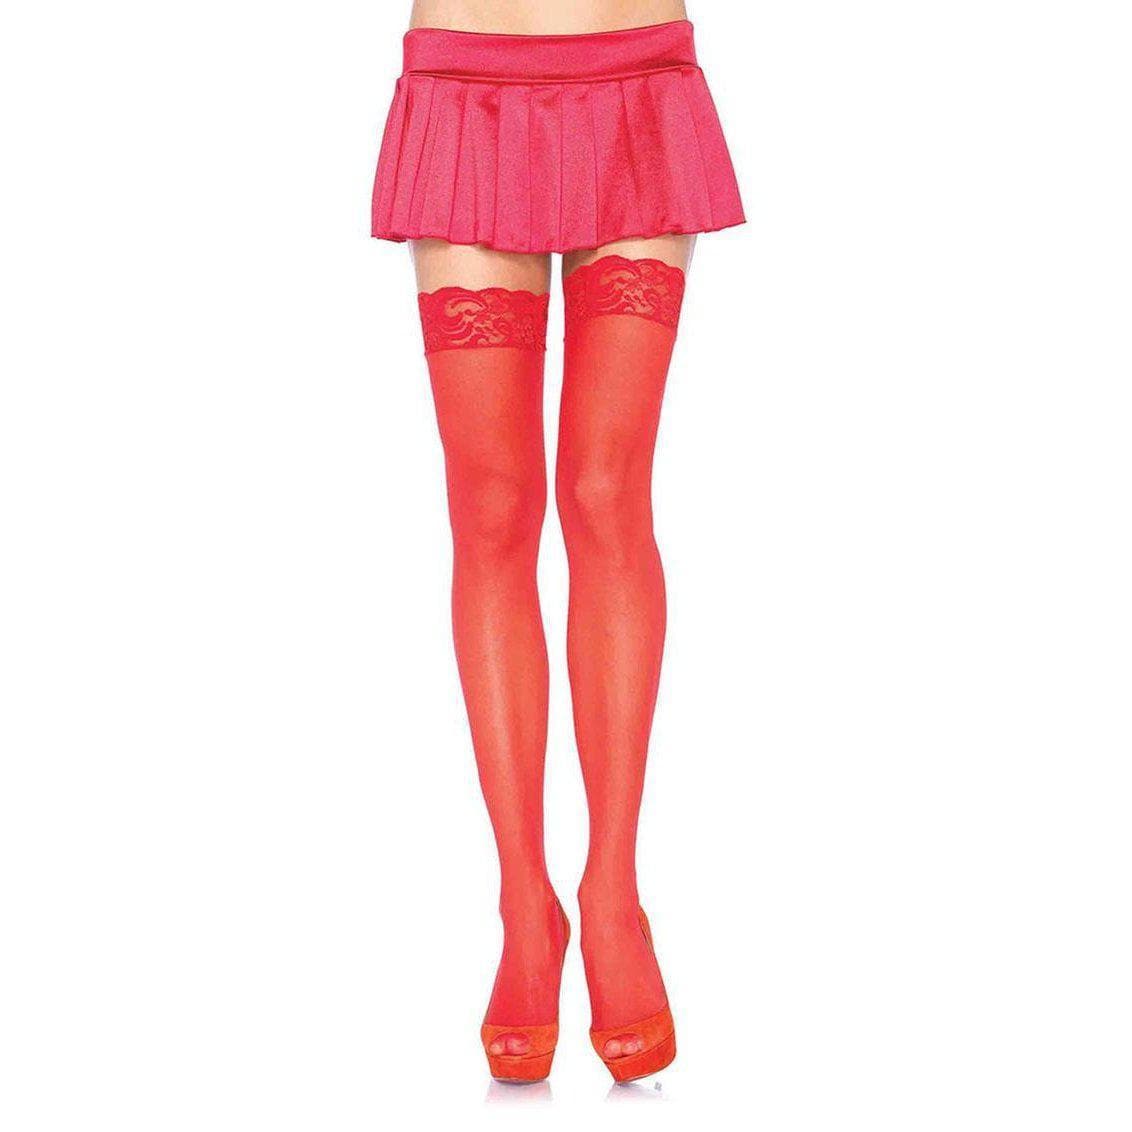 Leg Avenue Sheer Nylon Thigh High Stockings With Lace Top Red - Romantic Blessings